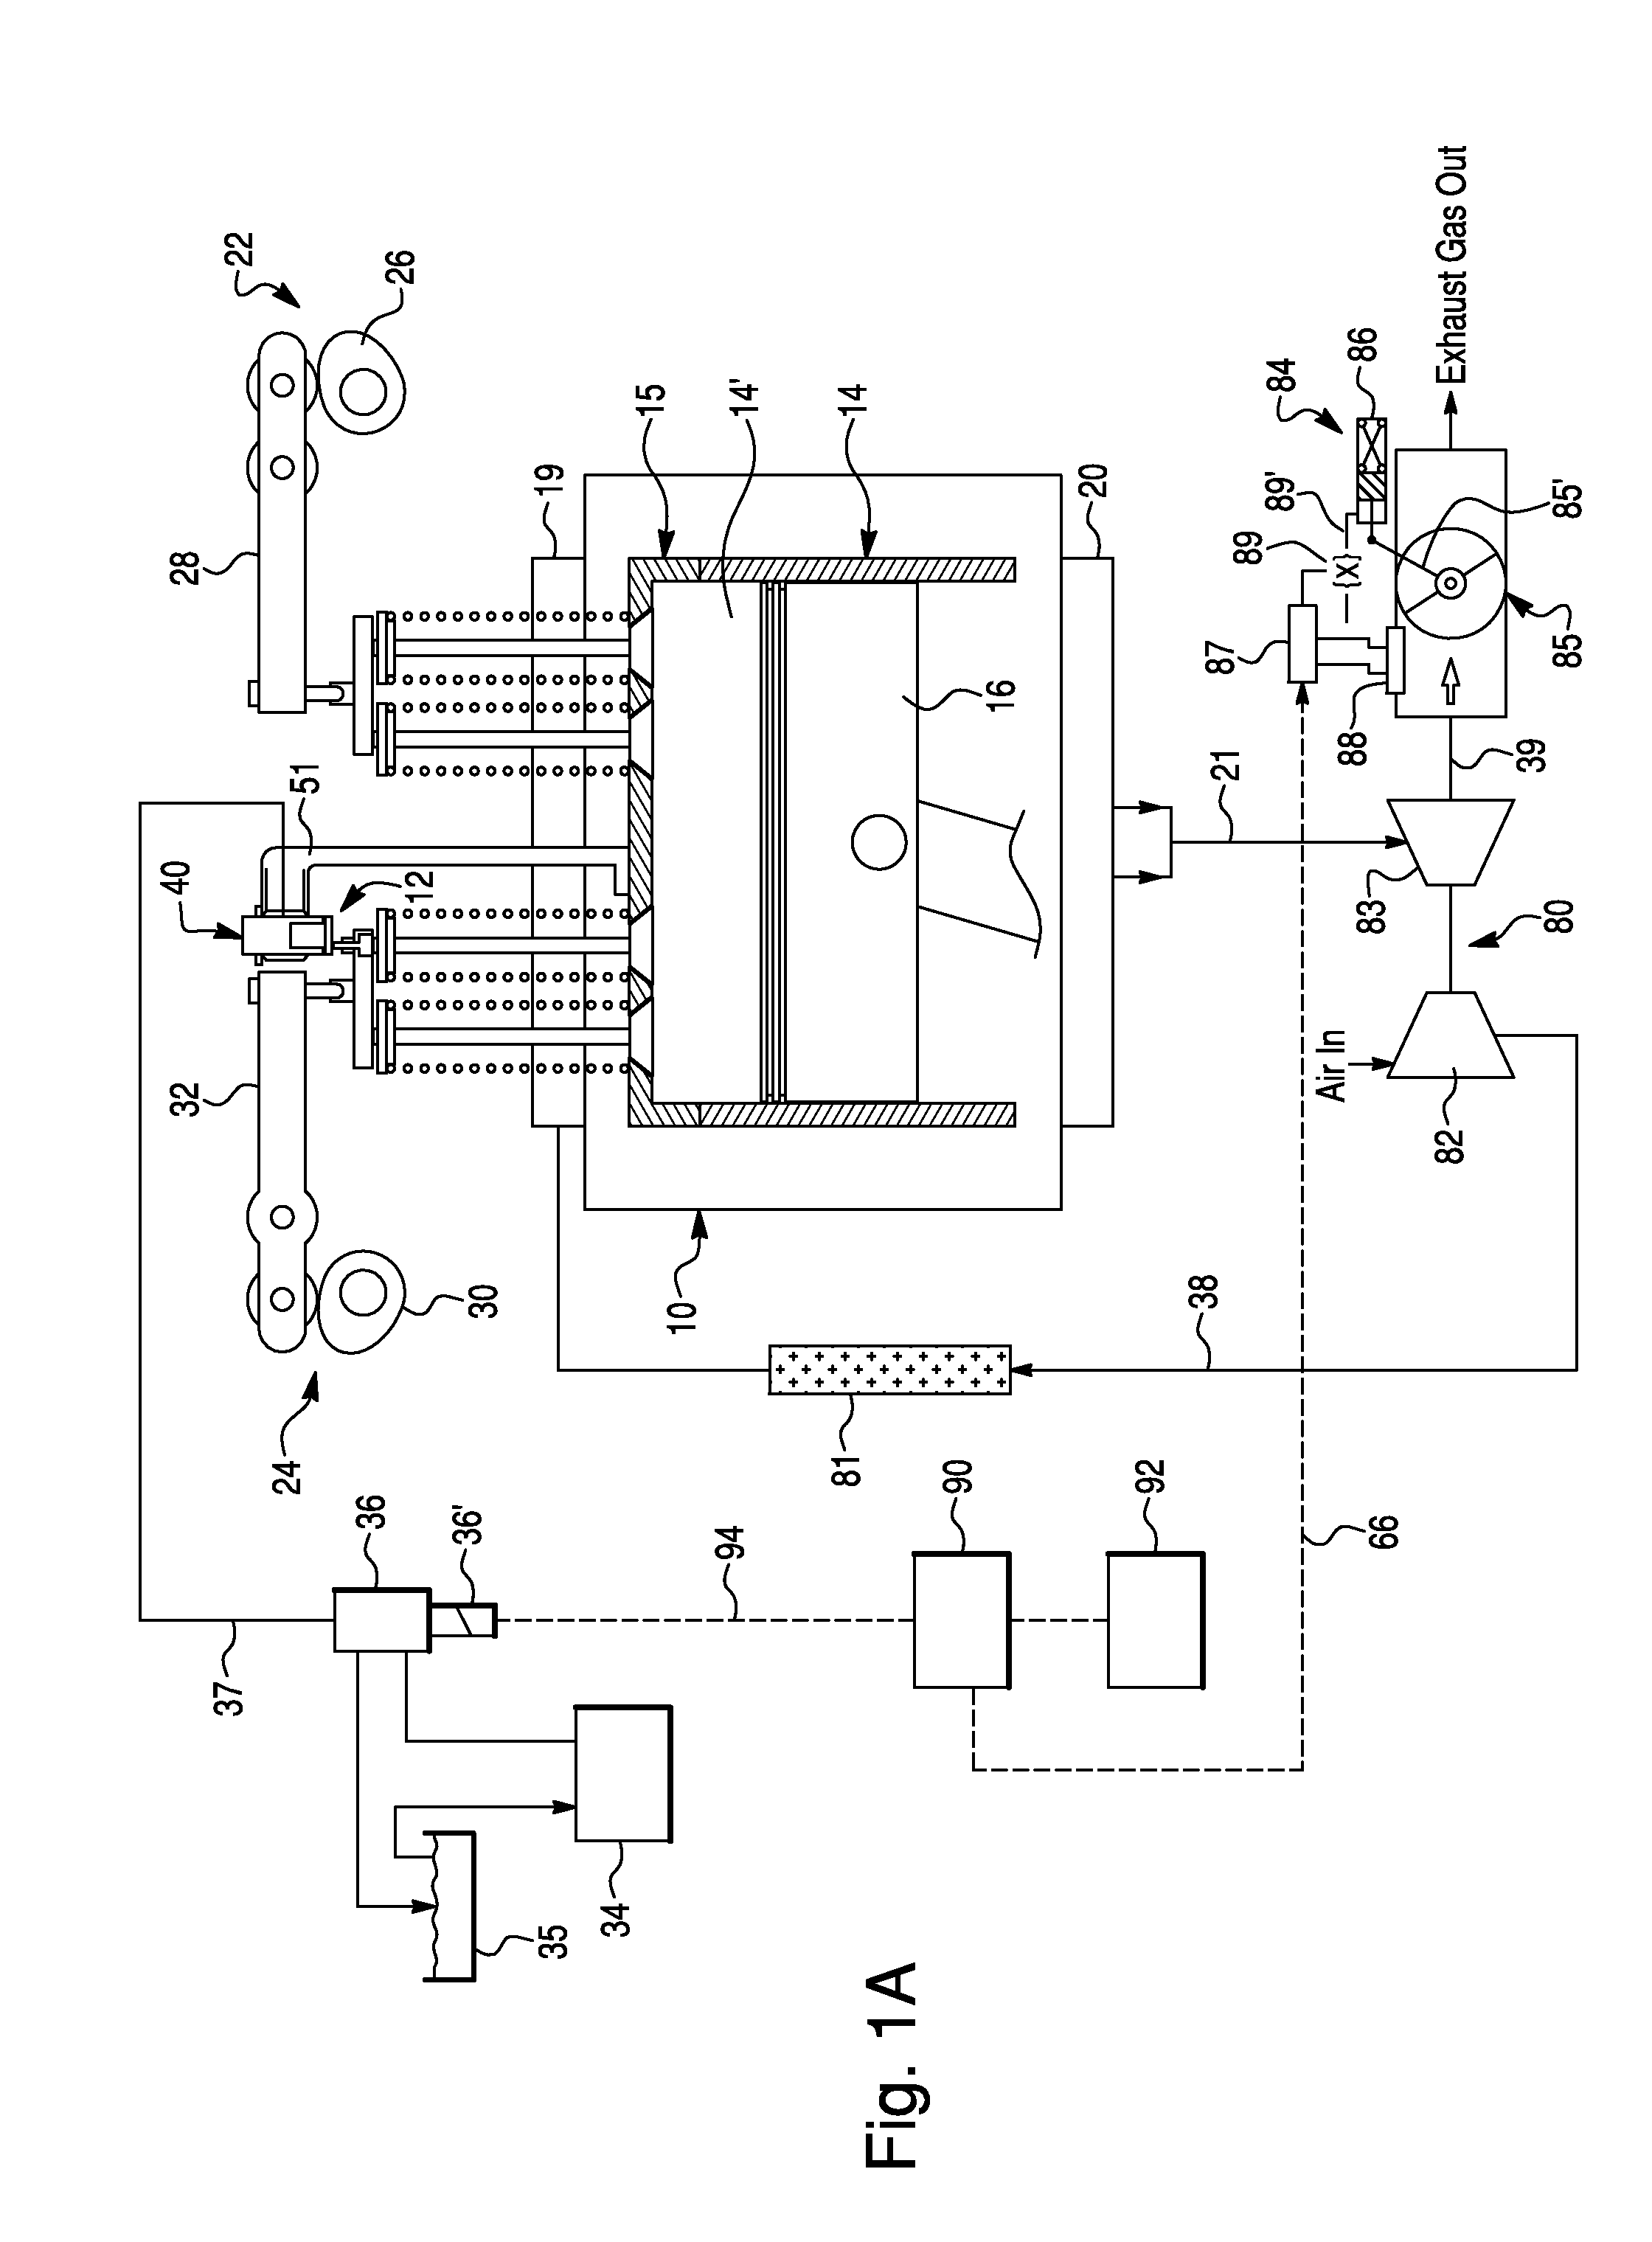 Self-contained compression brakecontrol module for compression-release brakesystem of internal combustion engine